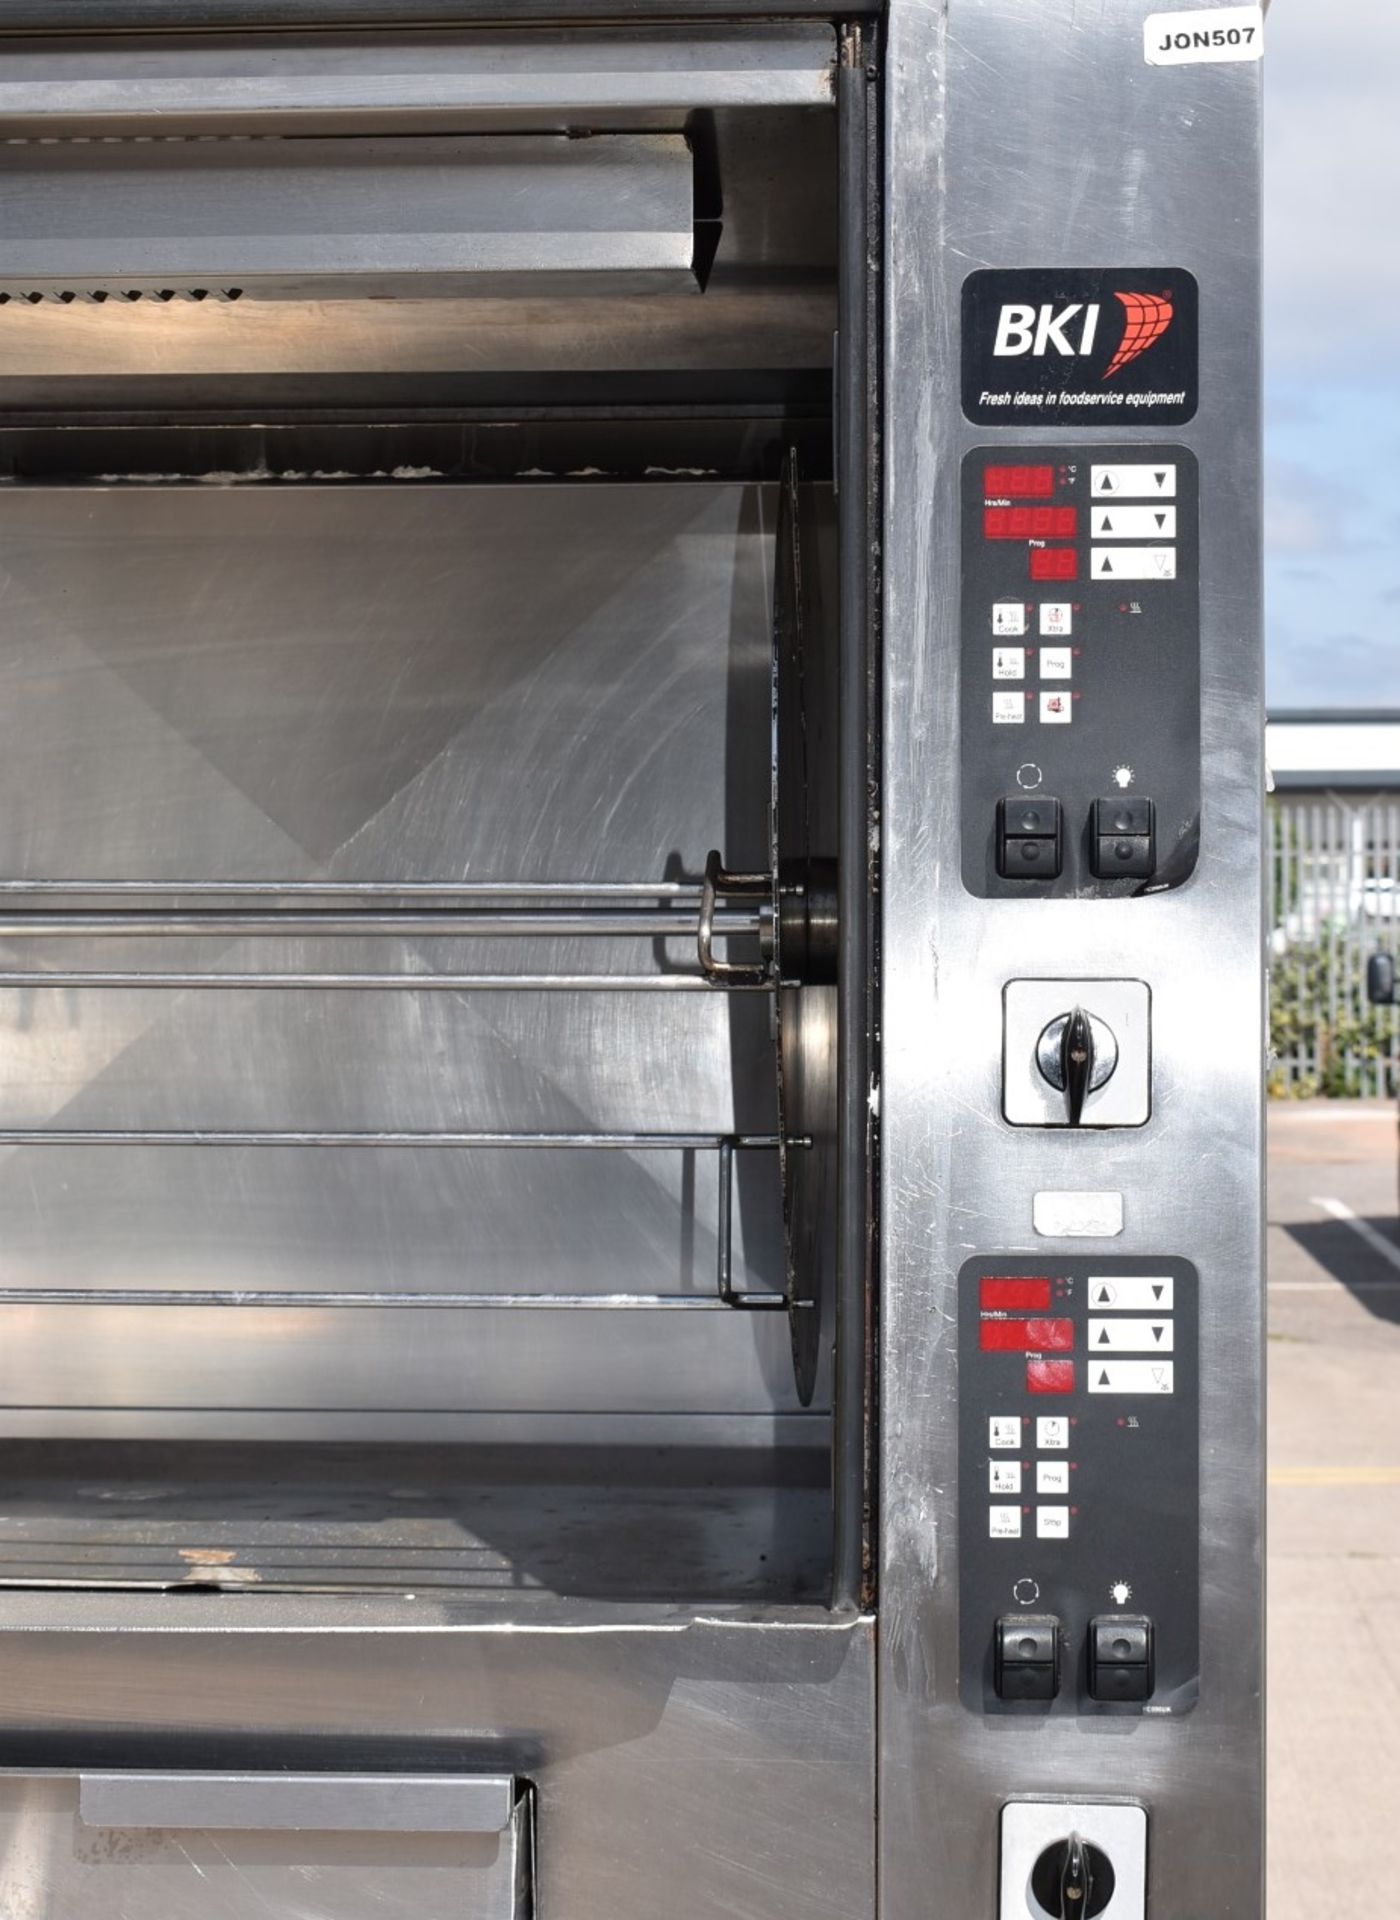 1 x BKI BBQ King Commercial Double Rotisserie Chicken Oven With Stand - Type VGUK16 - 3 Phase - Image 15 of 21